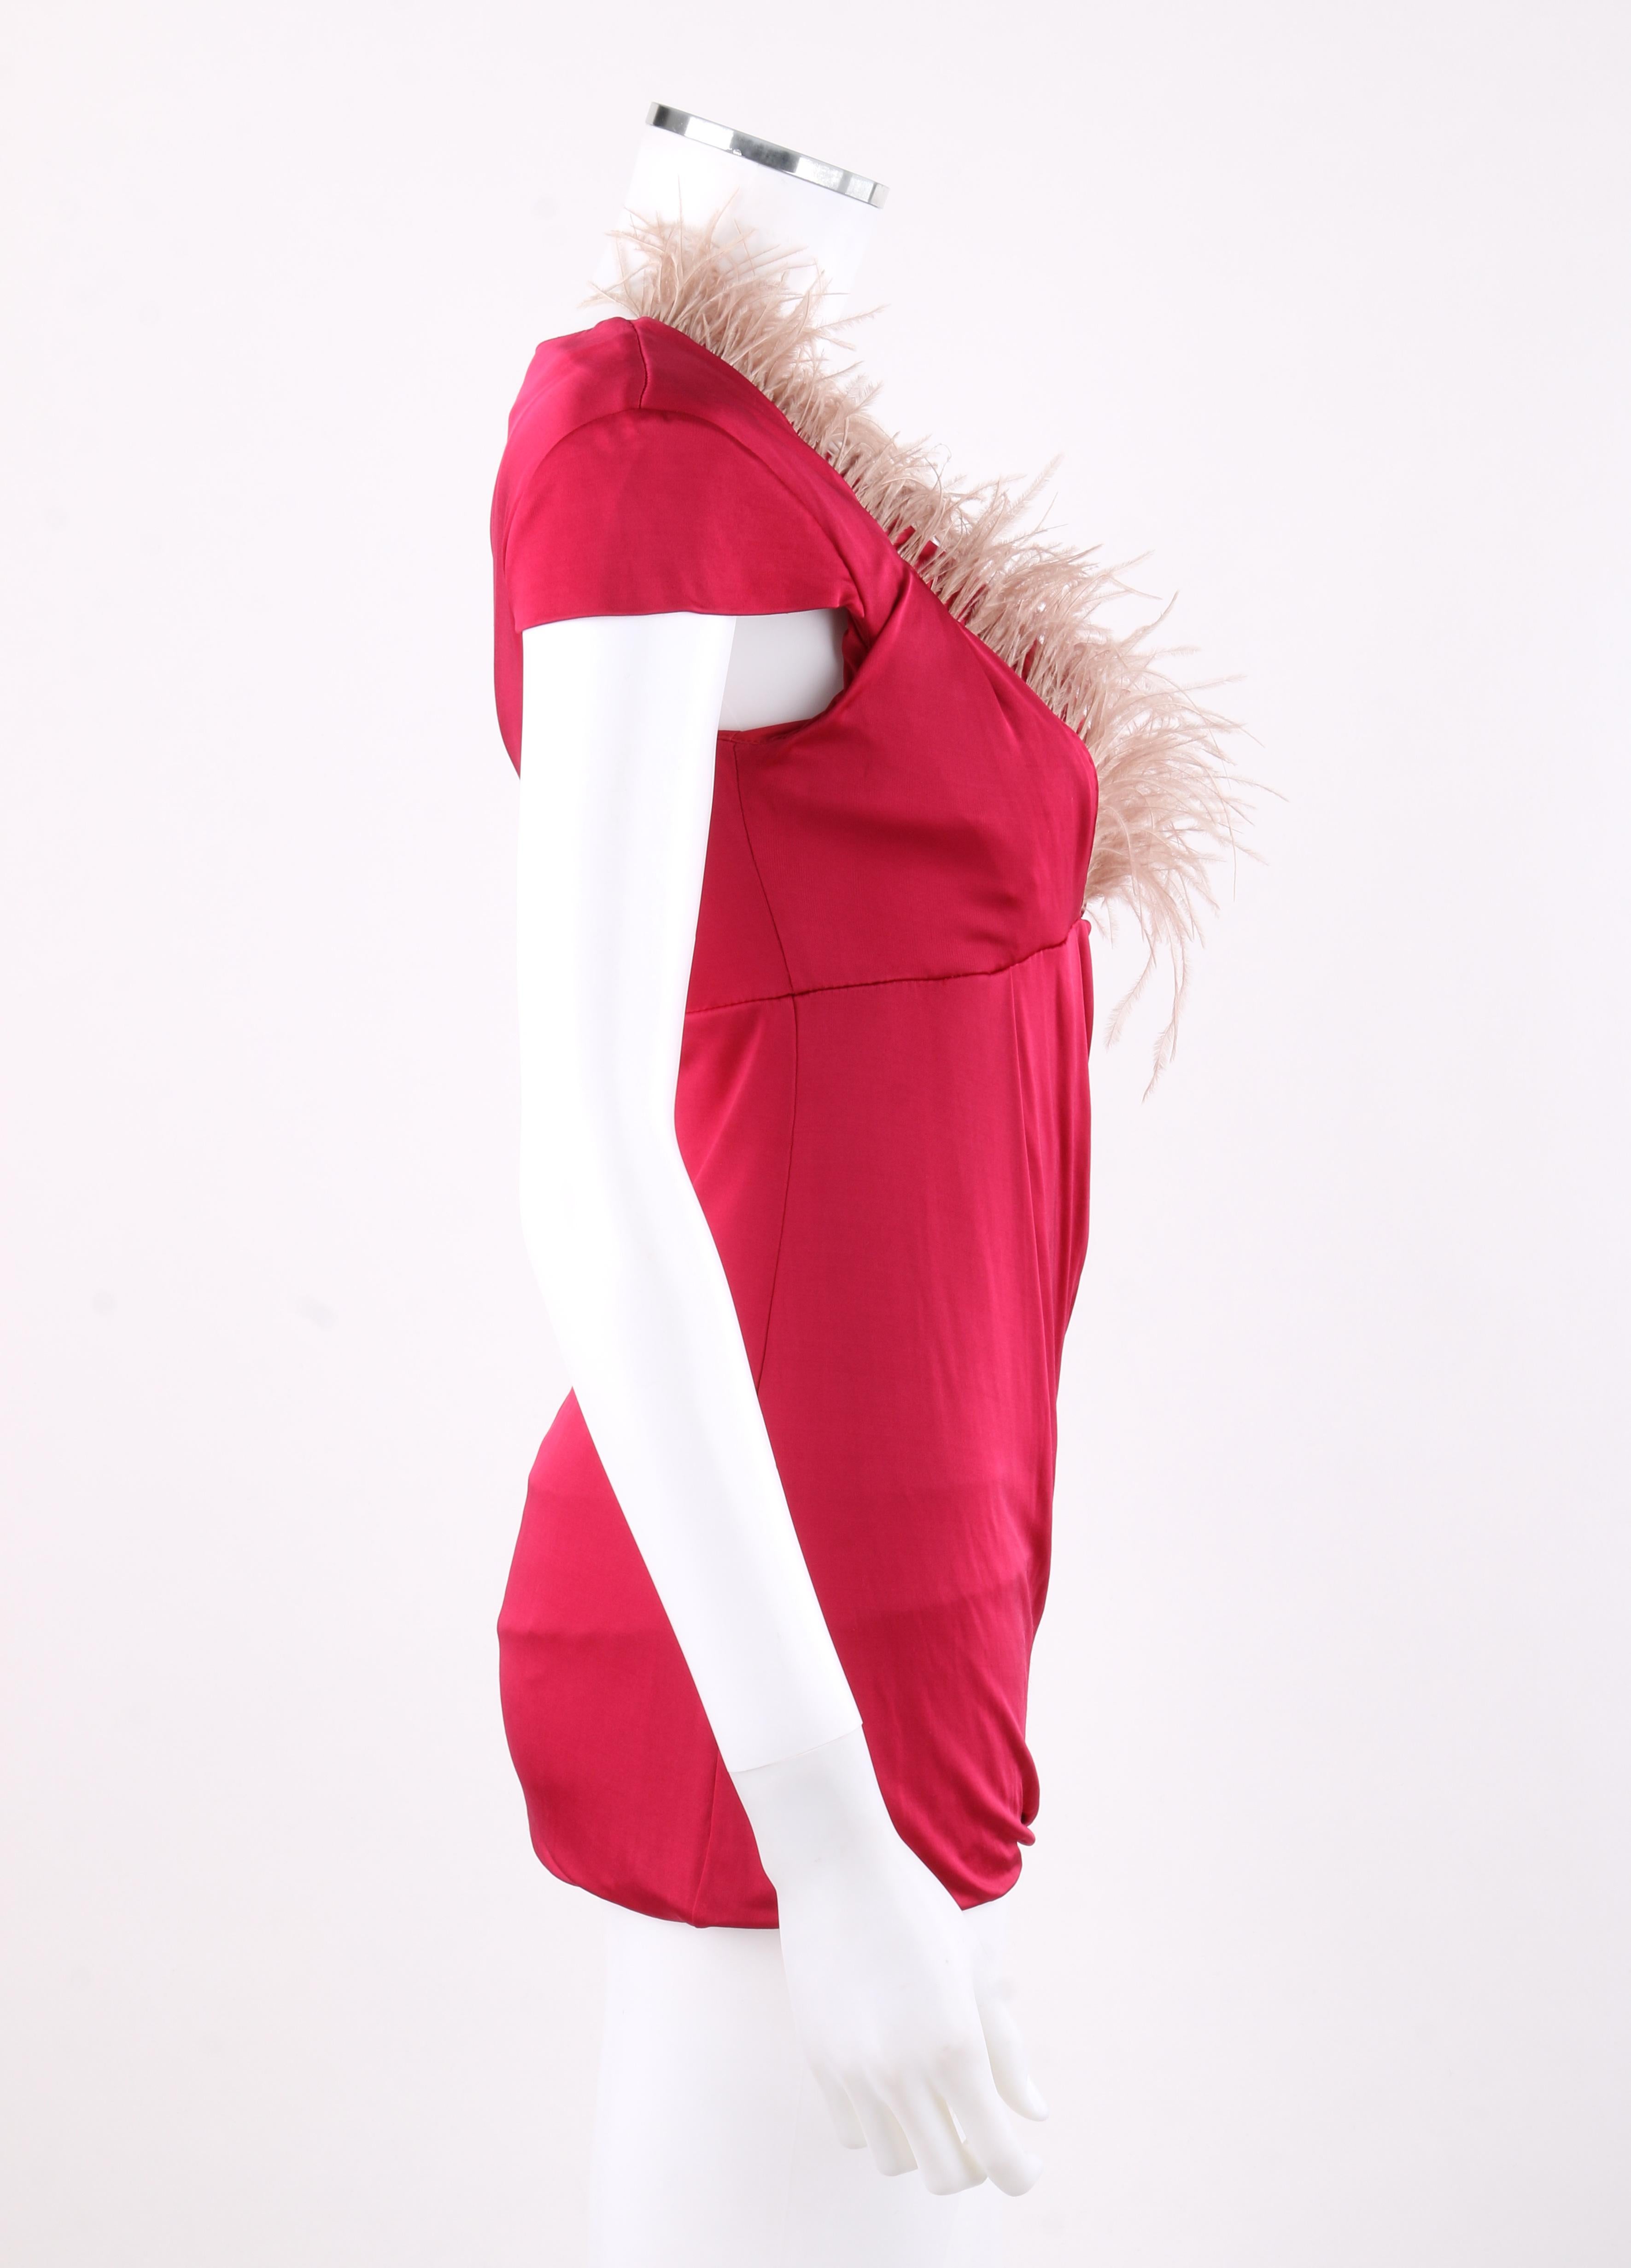 Red ALEXANDER McQUEEN c.2006 Cerise Silk Jersey Draped Ostrich Feather Top For Sale